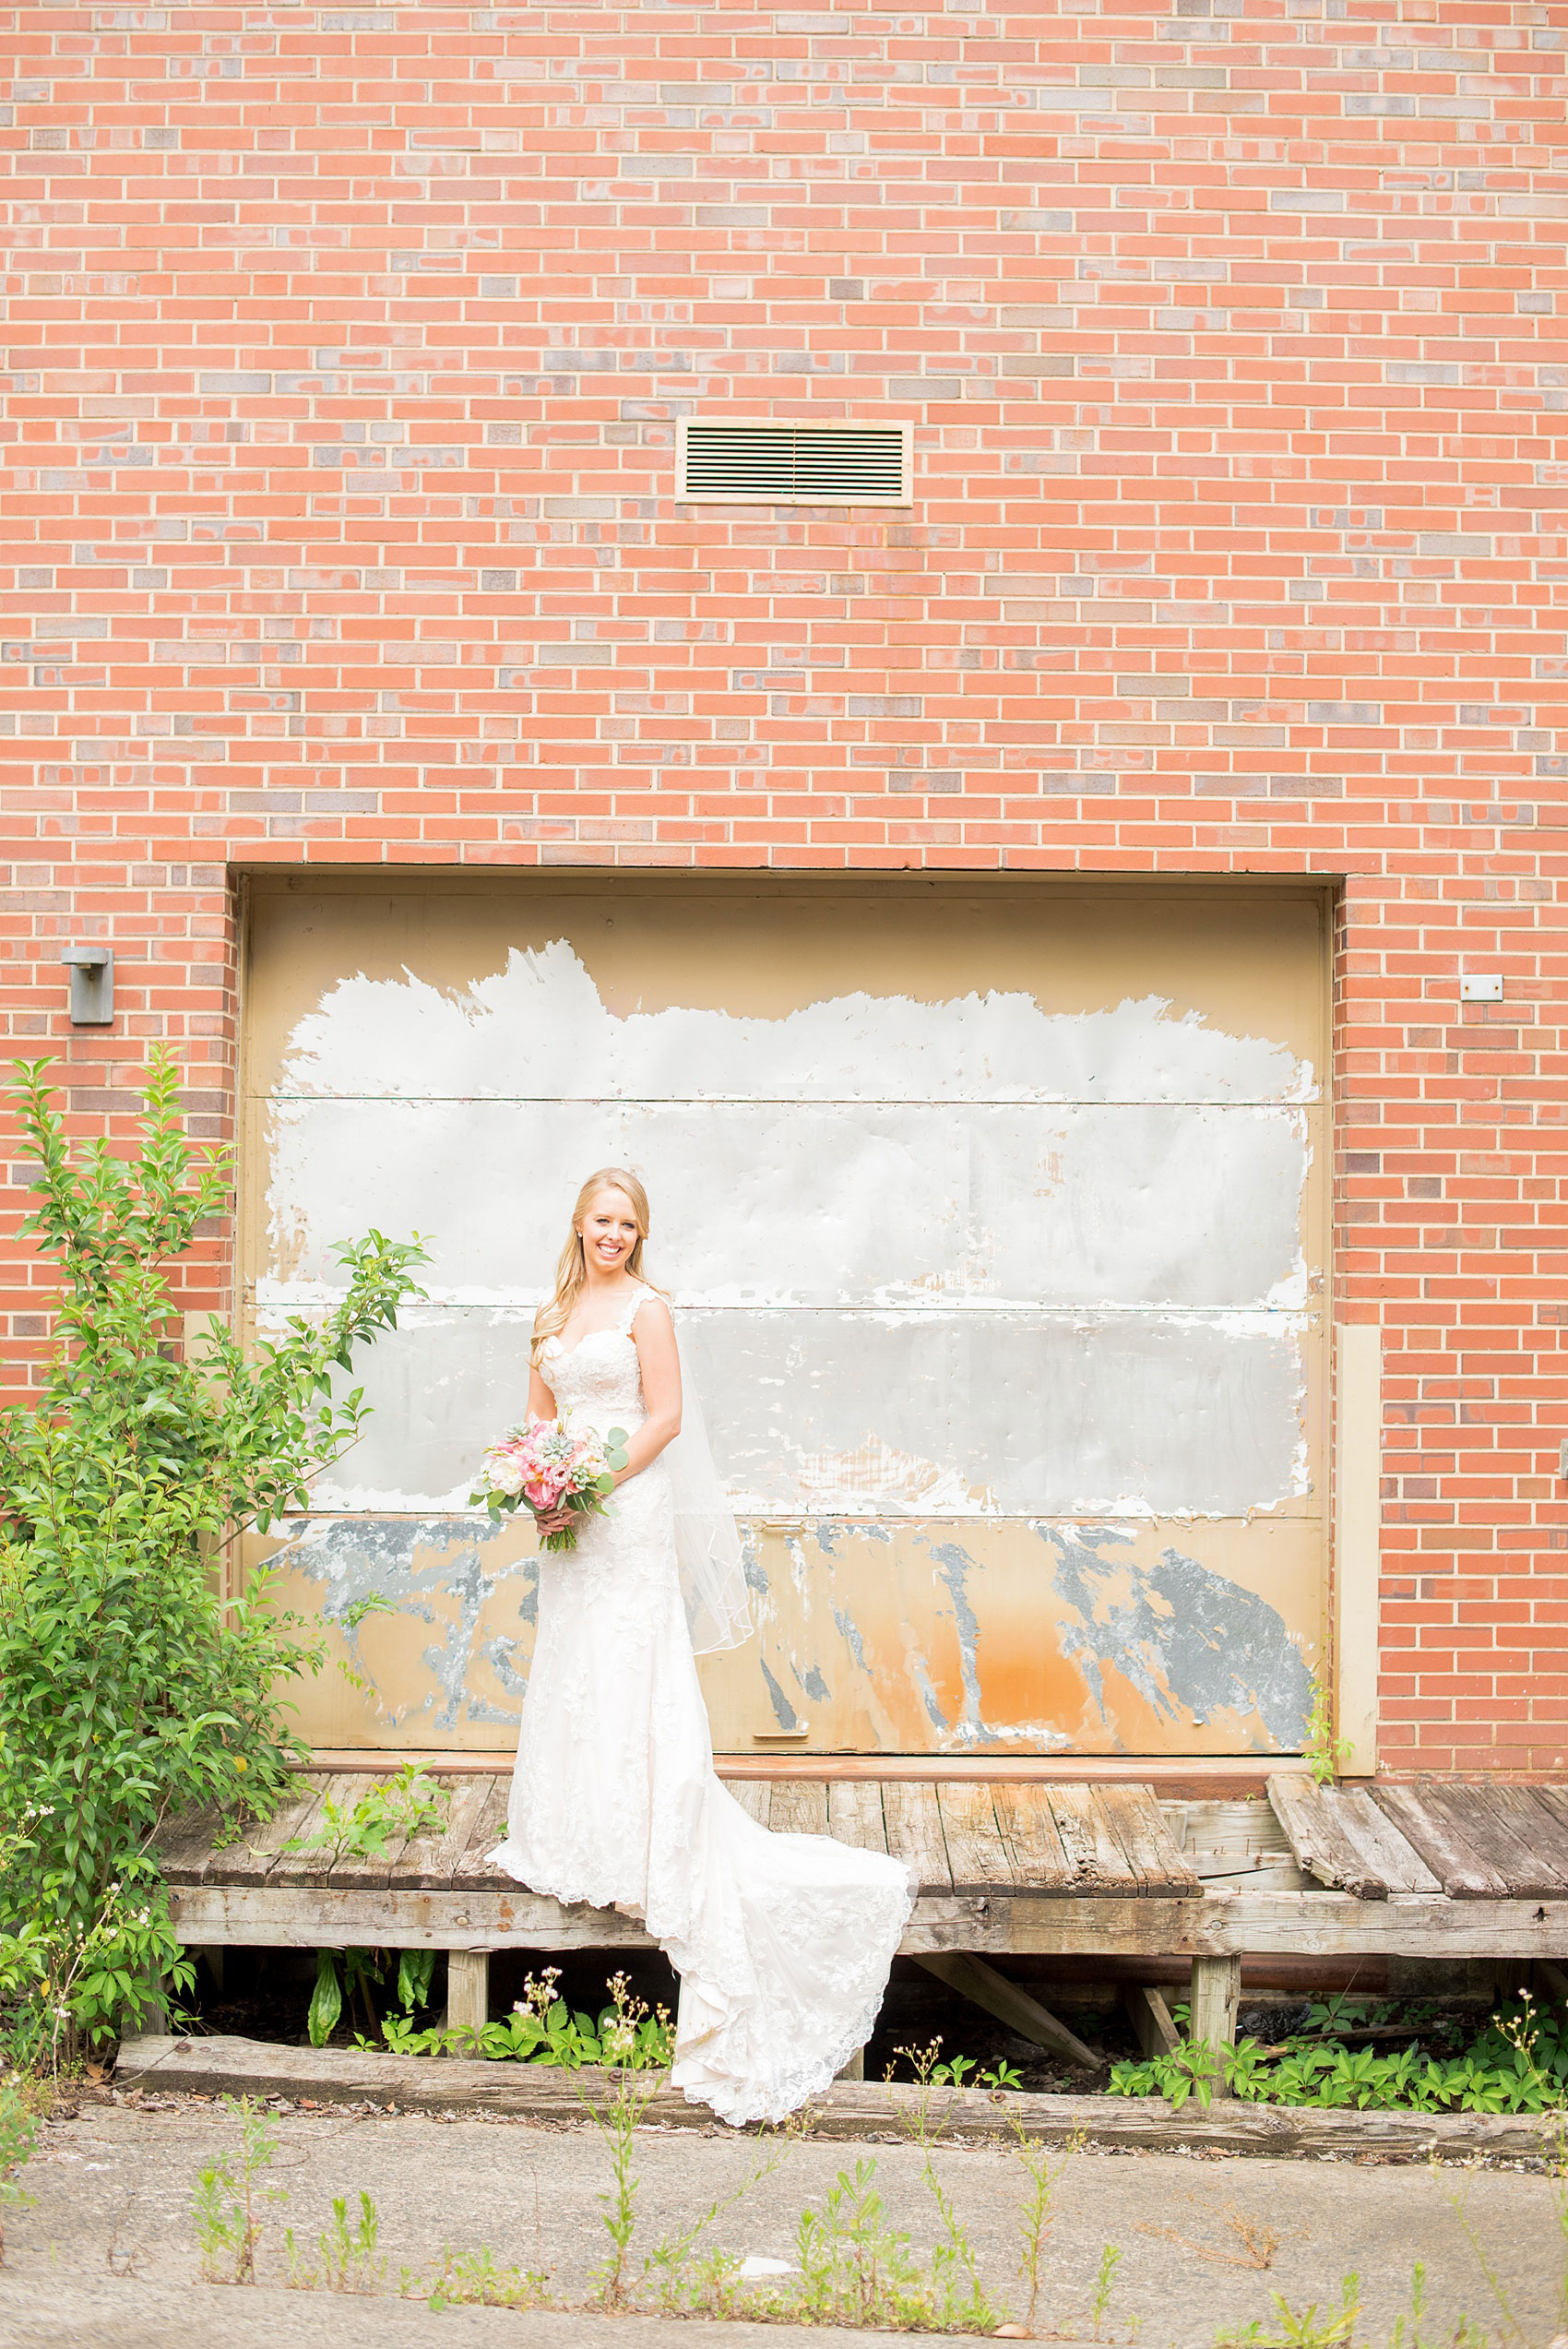 Mikkel Paige Photography photos from a wedding in Durham, North Carolina. Picture of the bride in an urban, rustic setting.